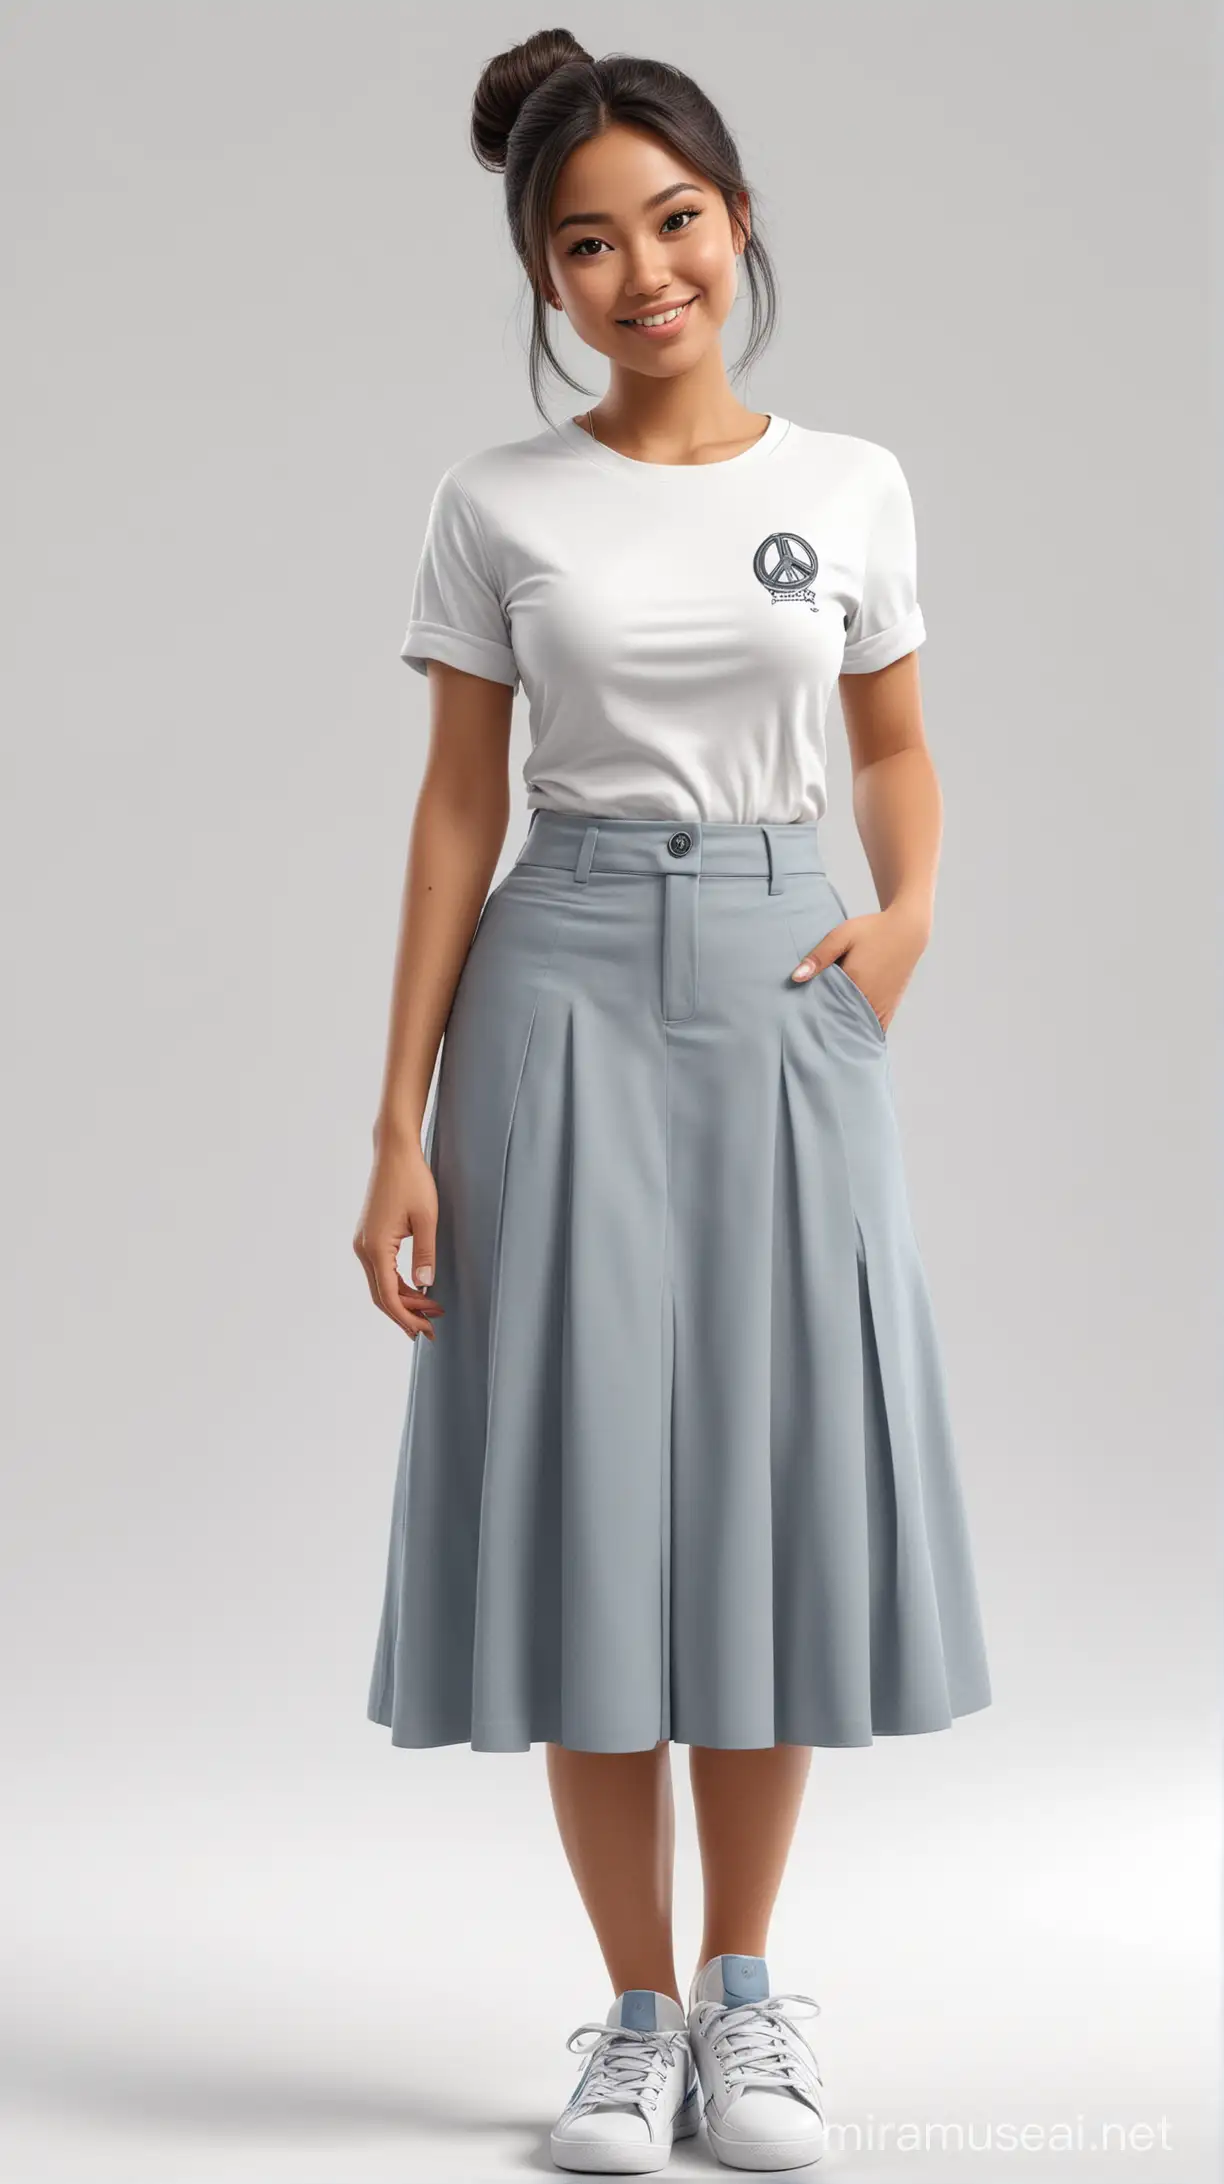 Indonesian Woman Holding Peace Symbol in White Pocket Shirt and Gray Skirt